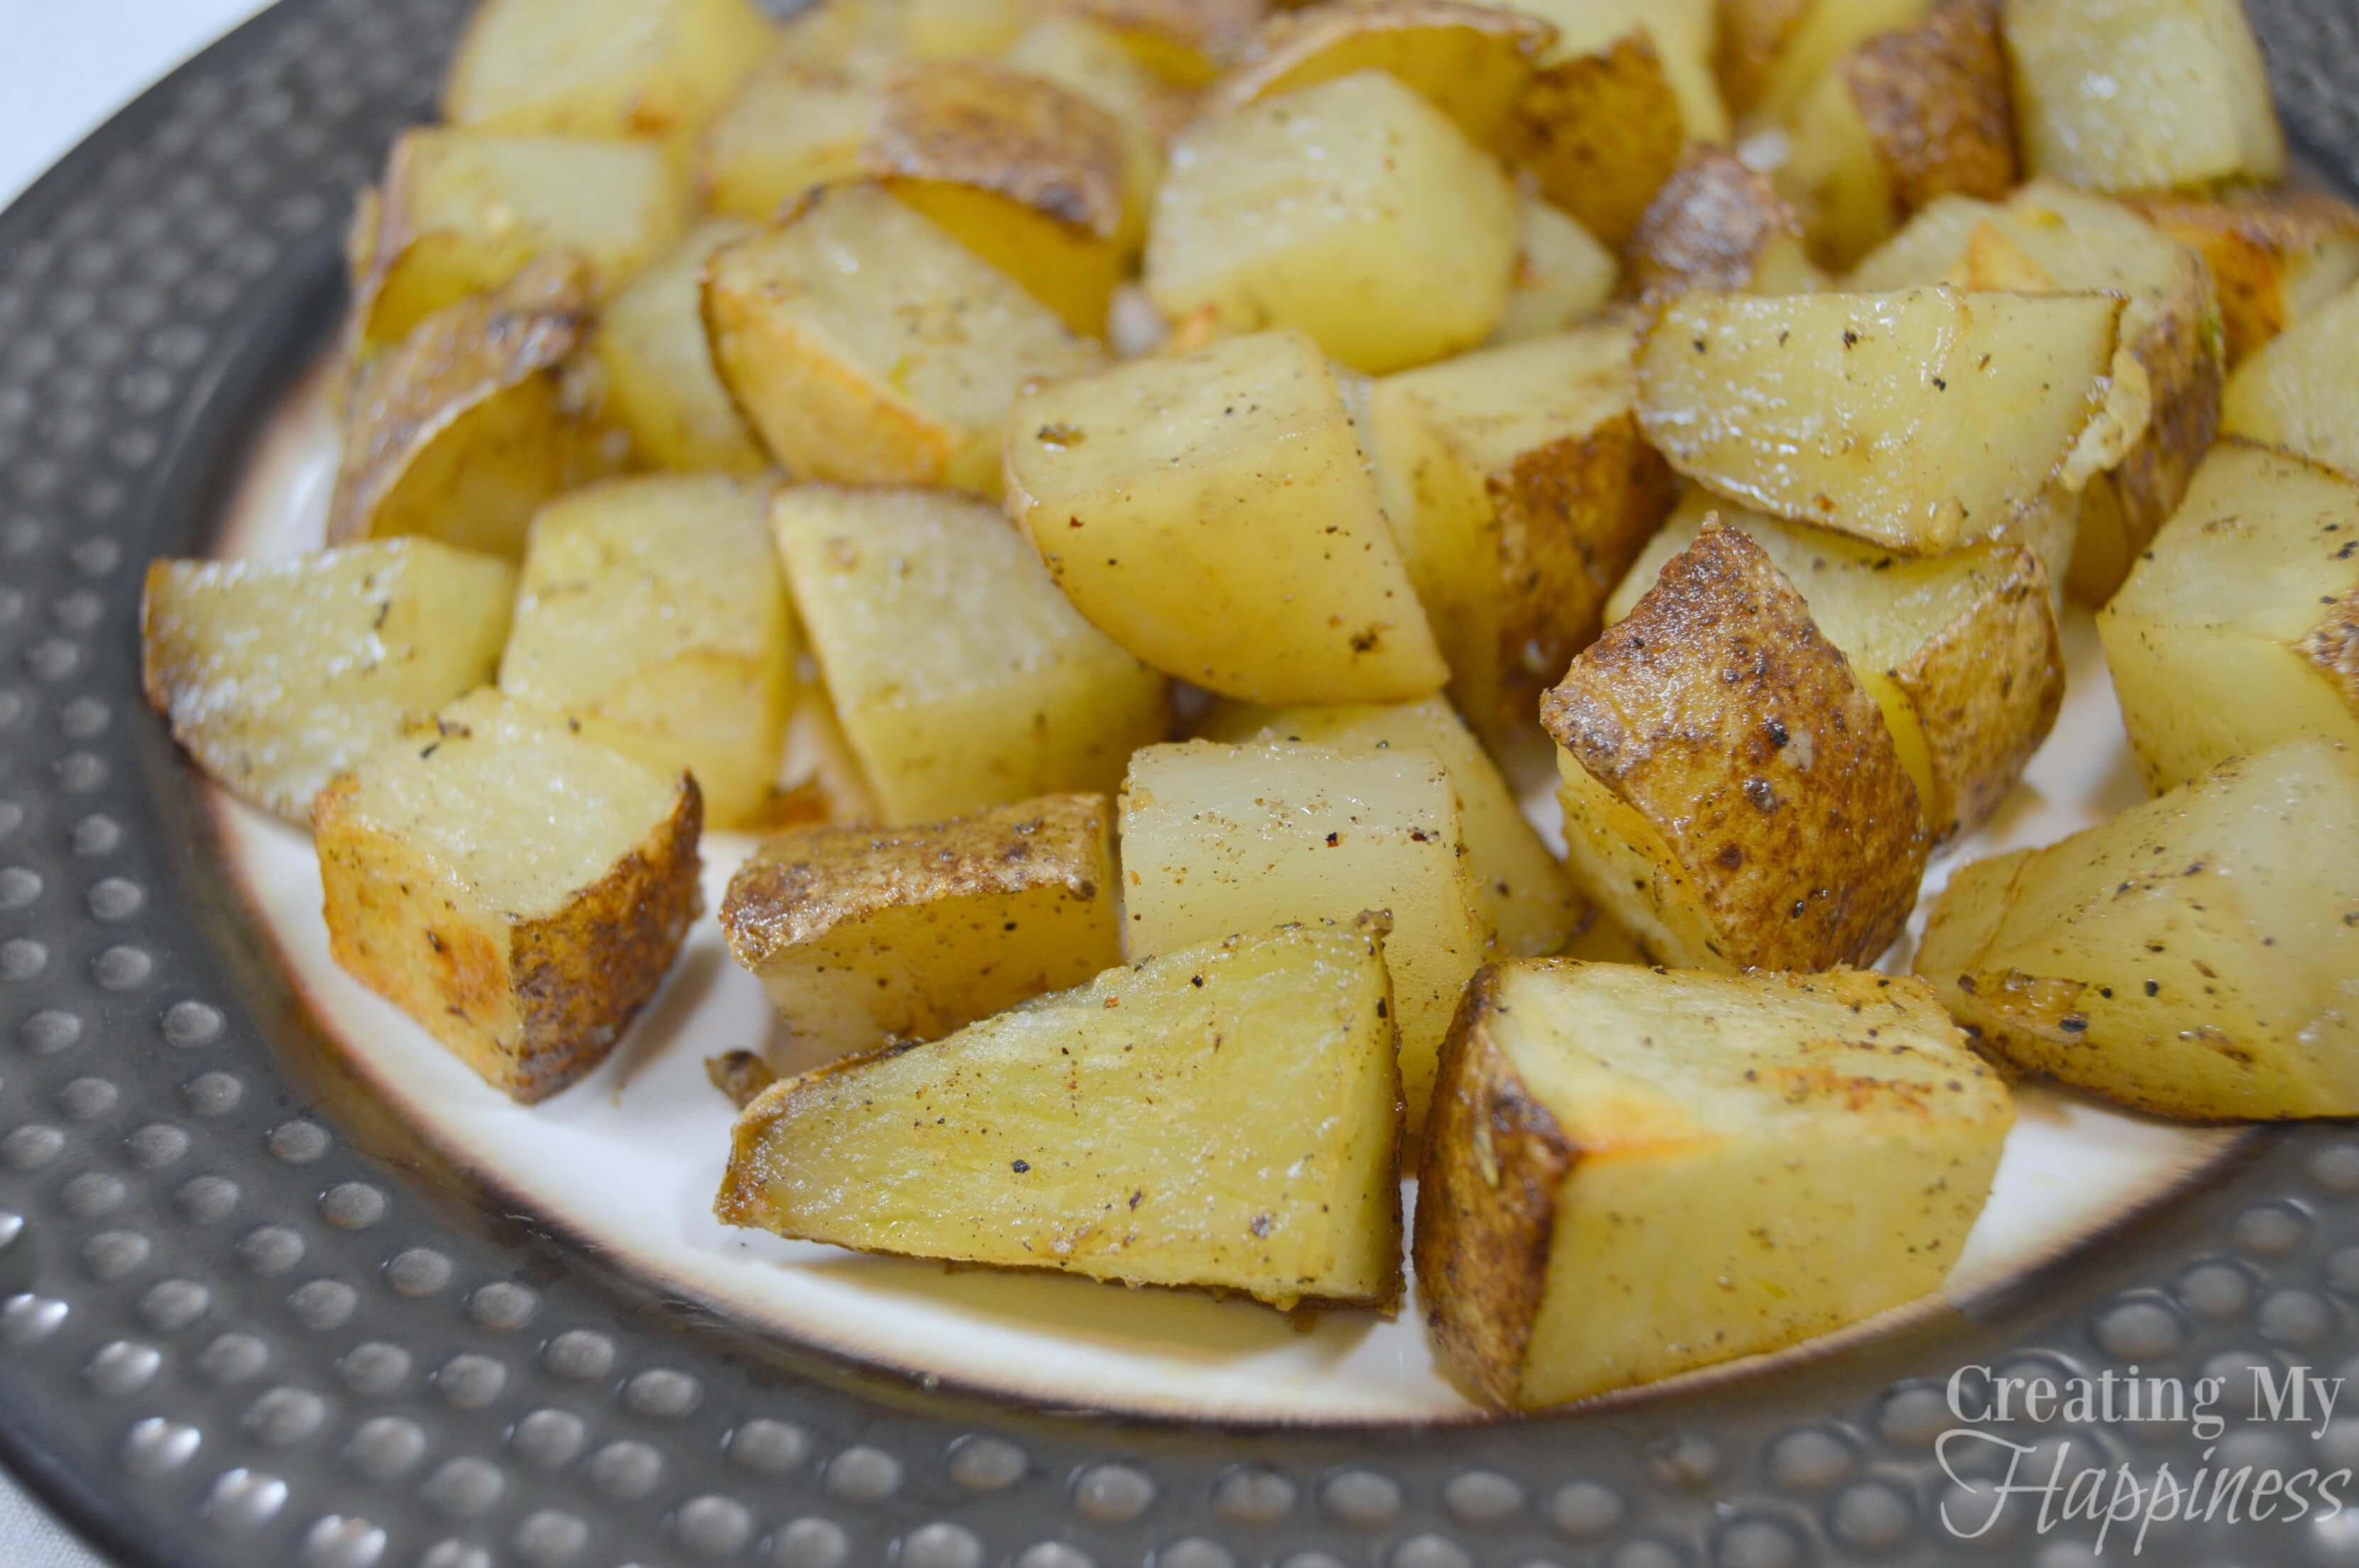 Perfect for a family dinner or having company over, these roasted potatoes are sure to please everyone at your table!